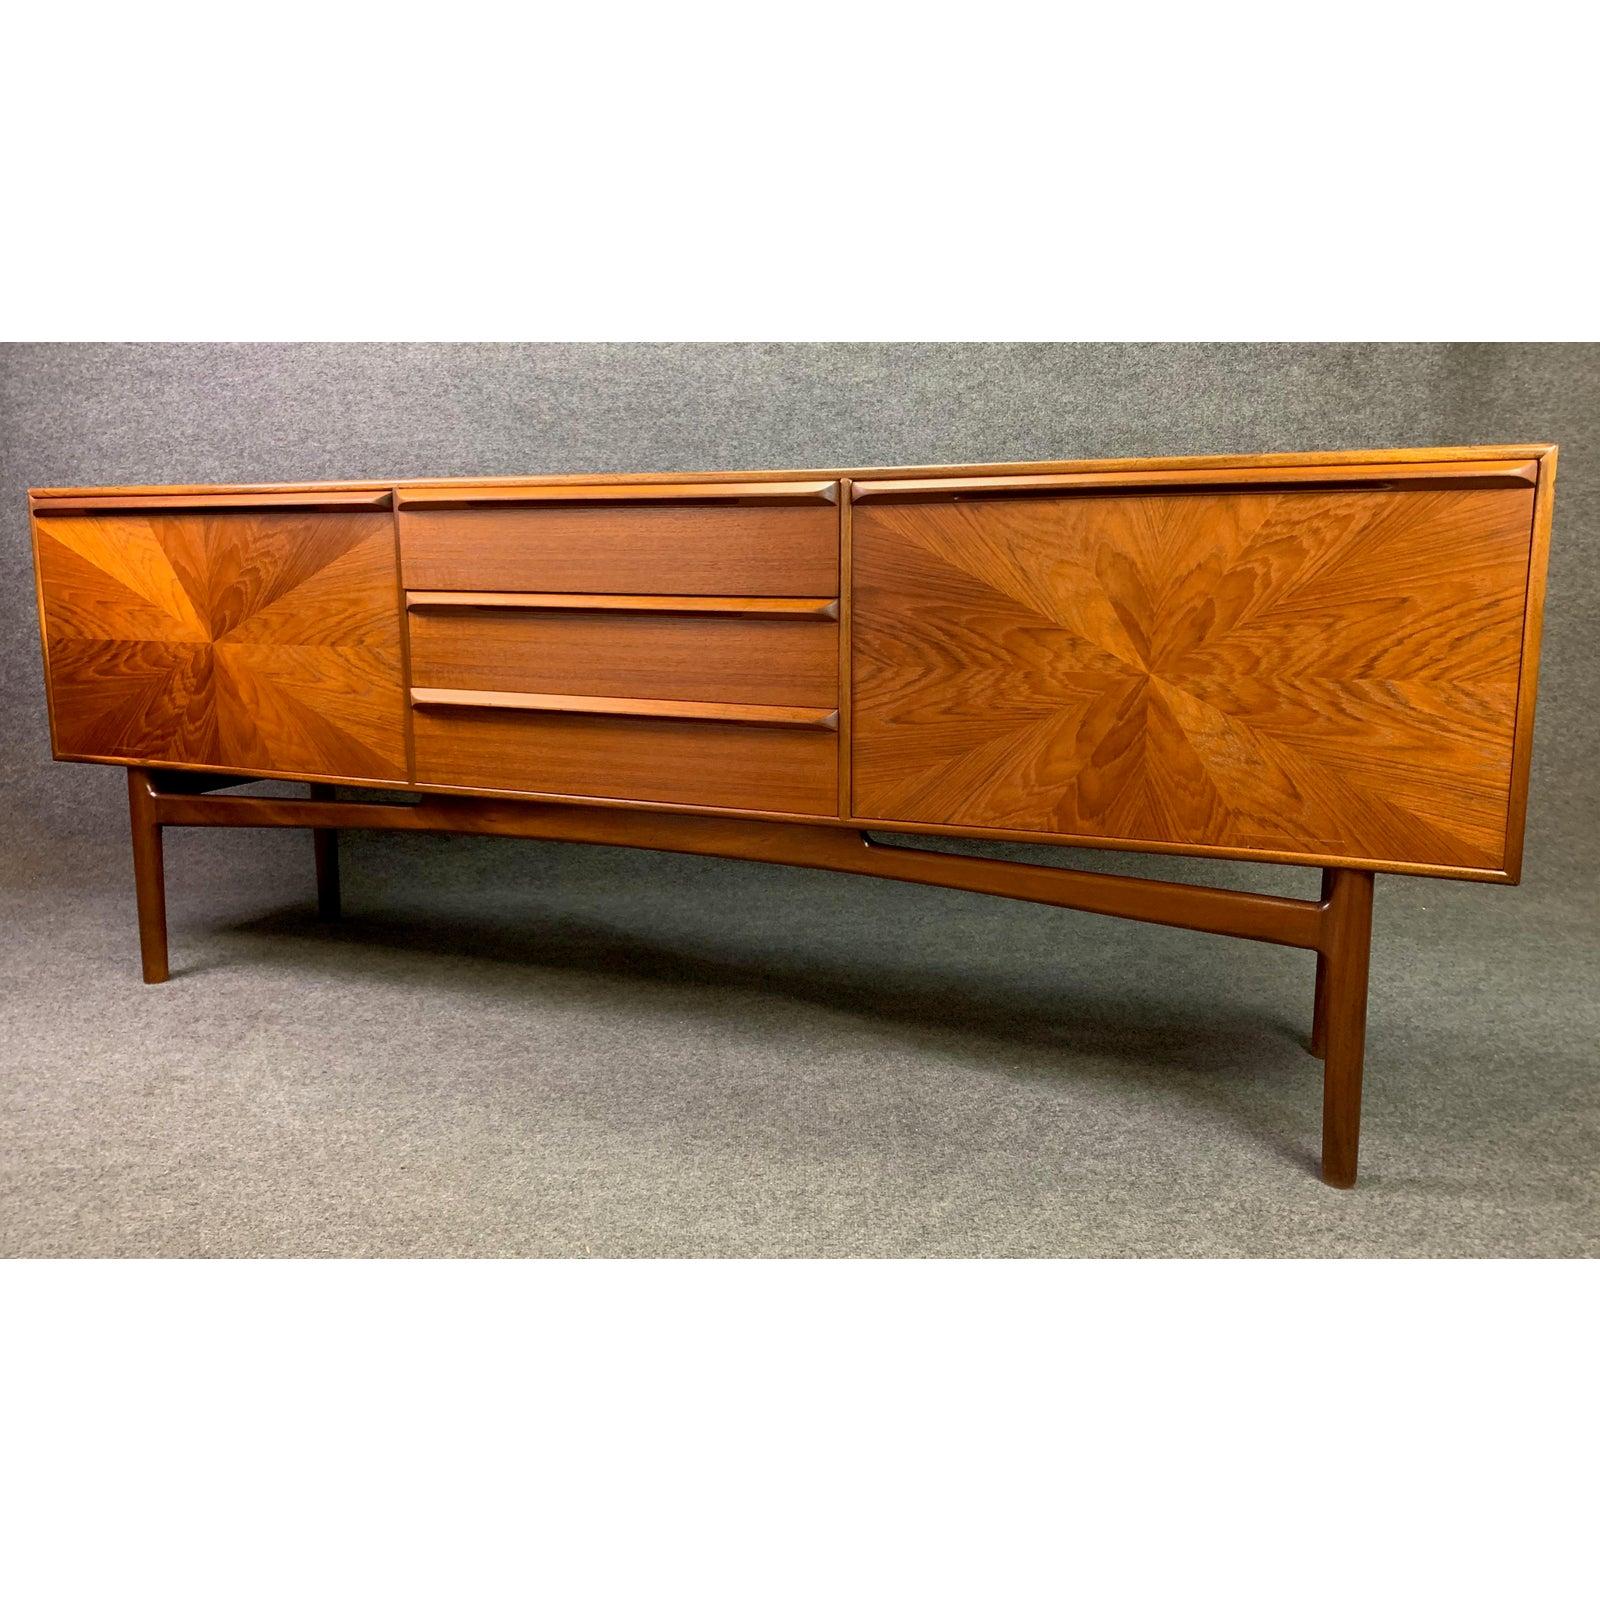 Here is a beautiful 1960s sideboard in teak wood from the 